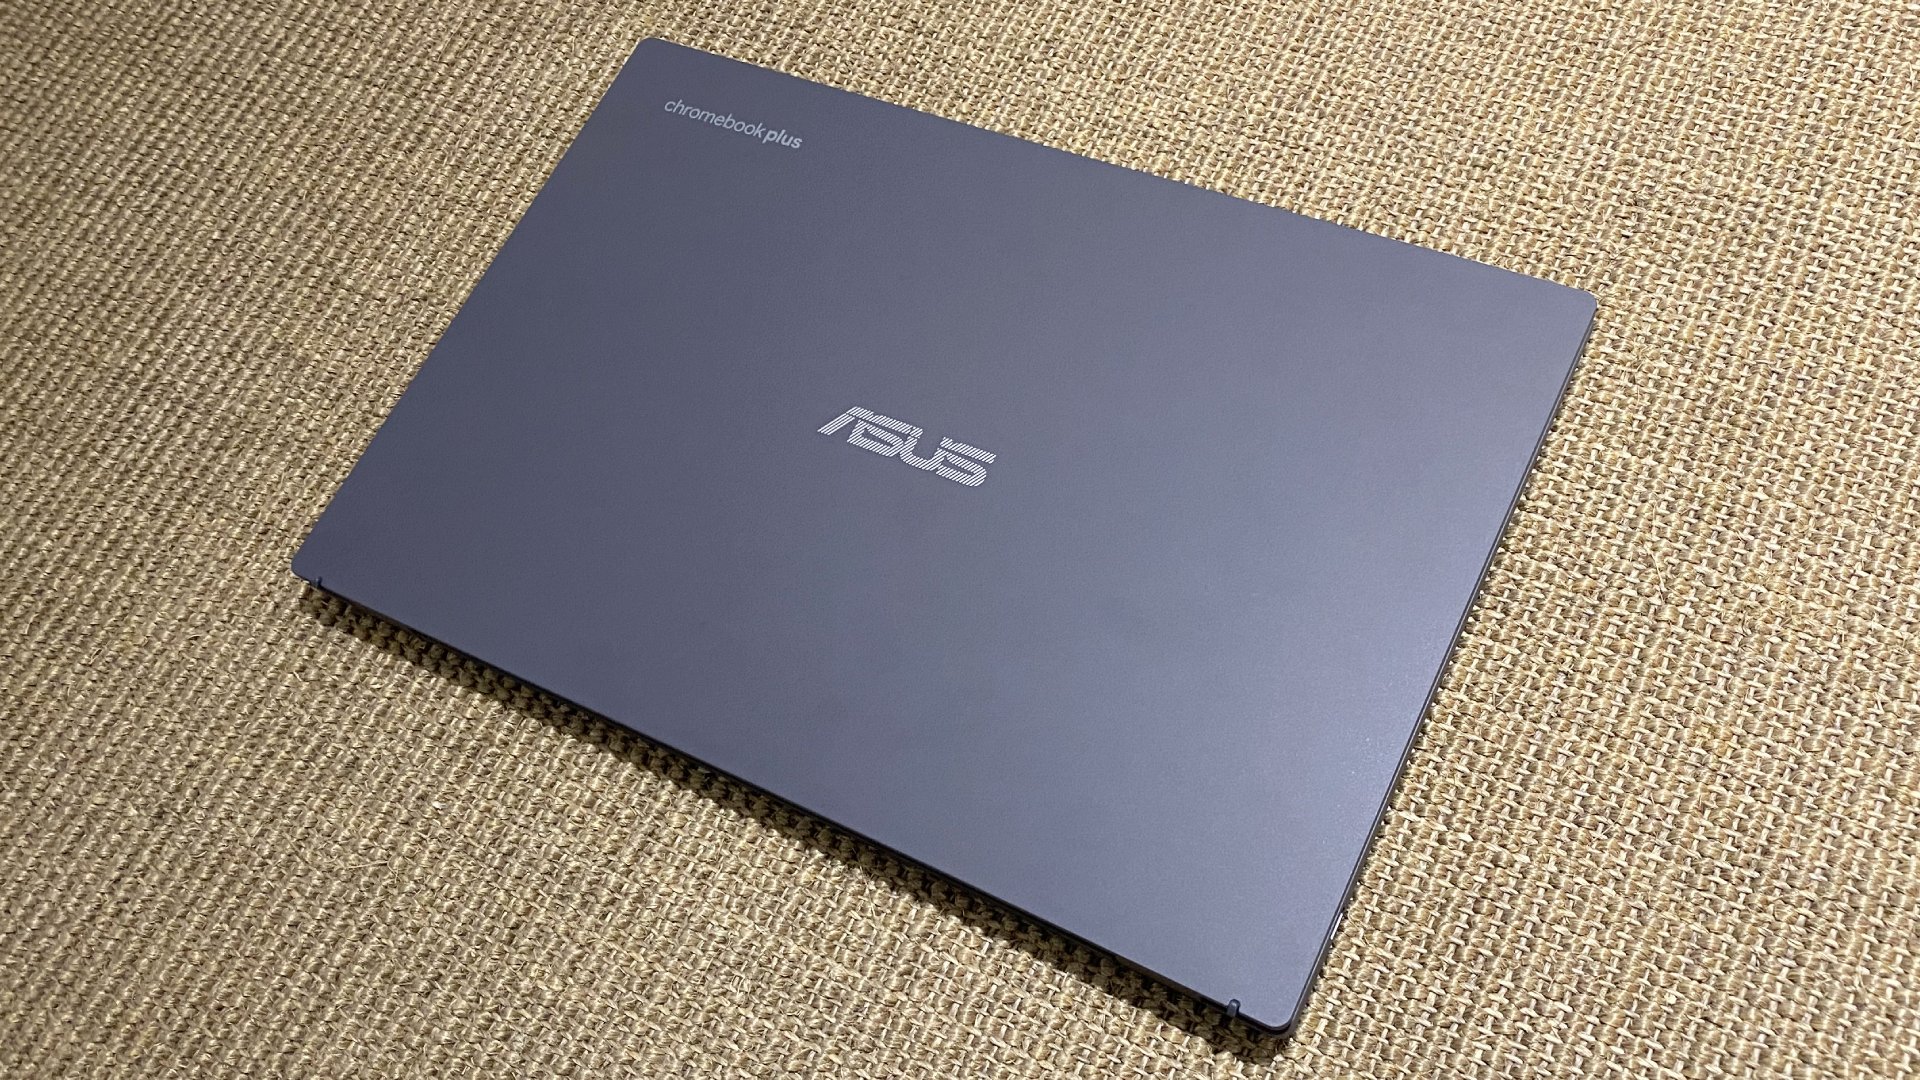 The Asus Chromebook Plus CX34 photographed with the lid closed.